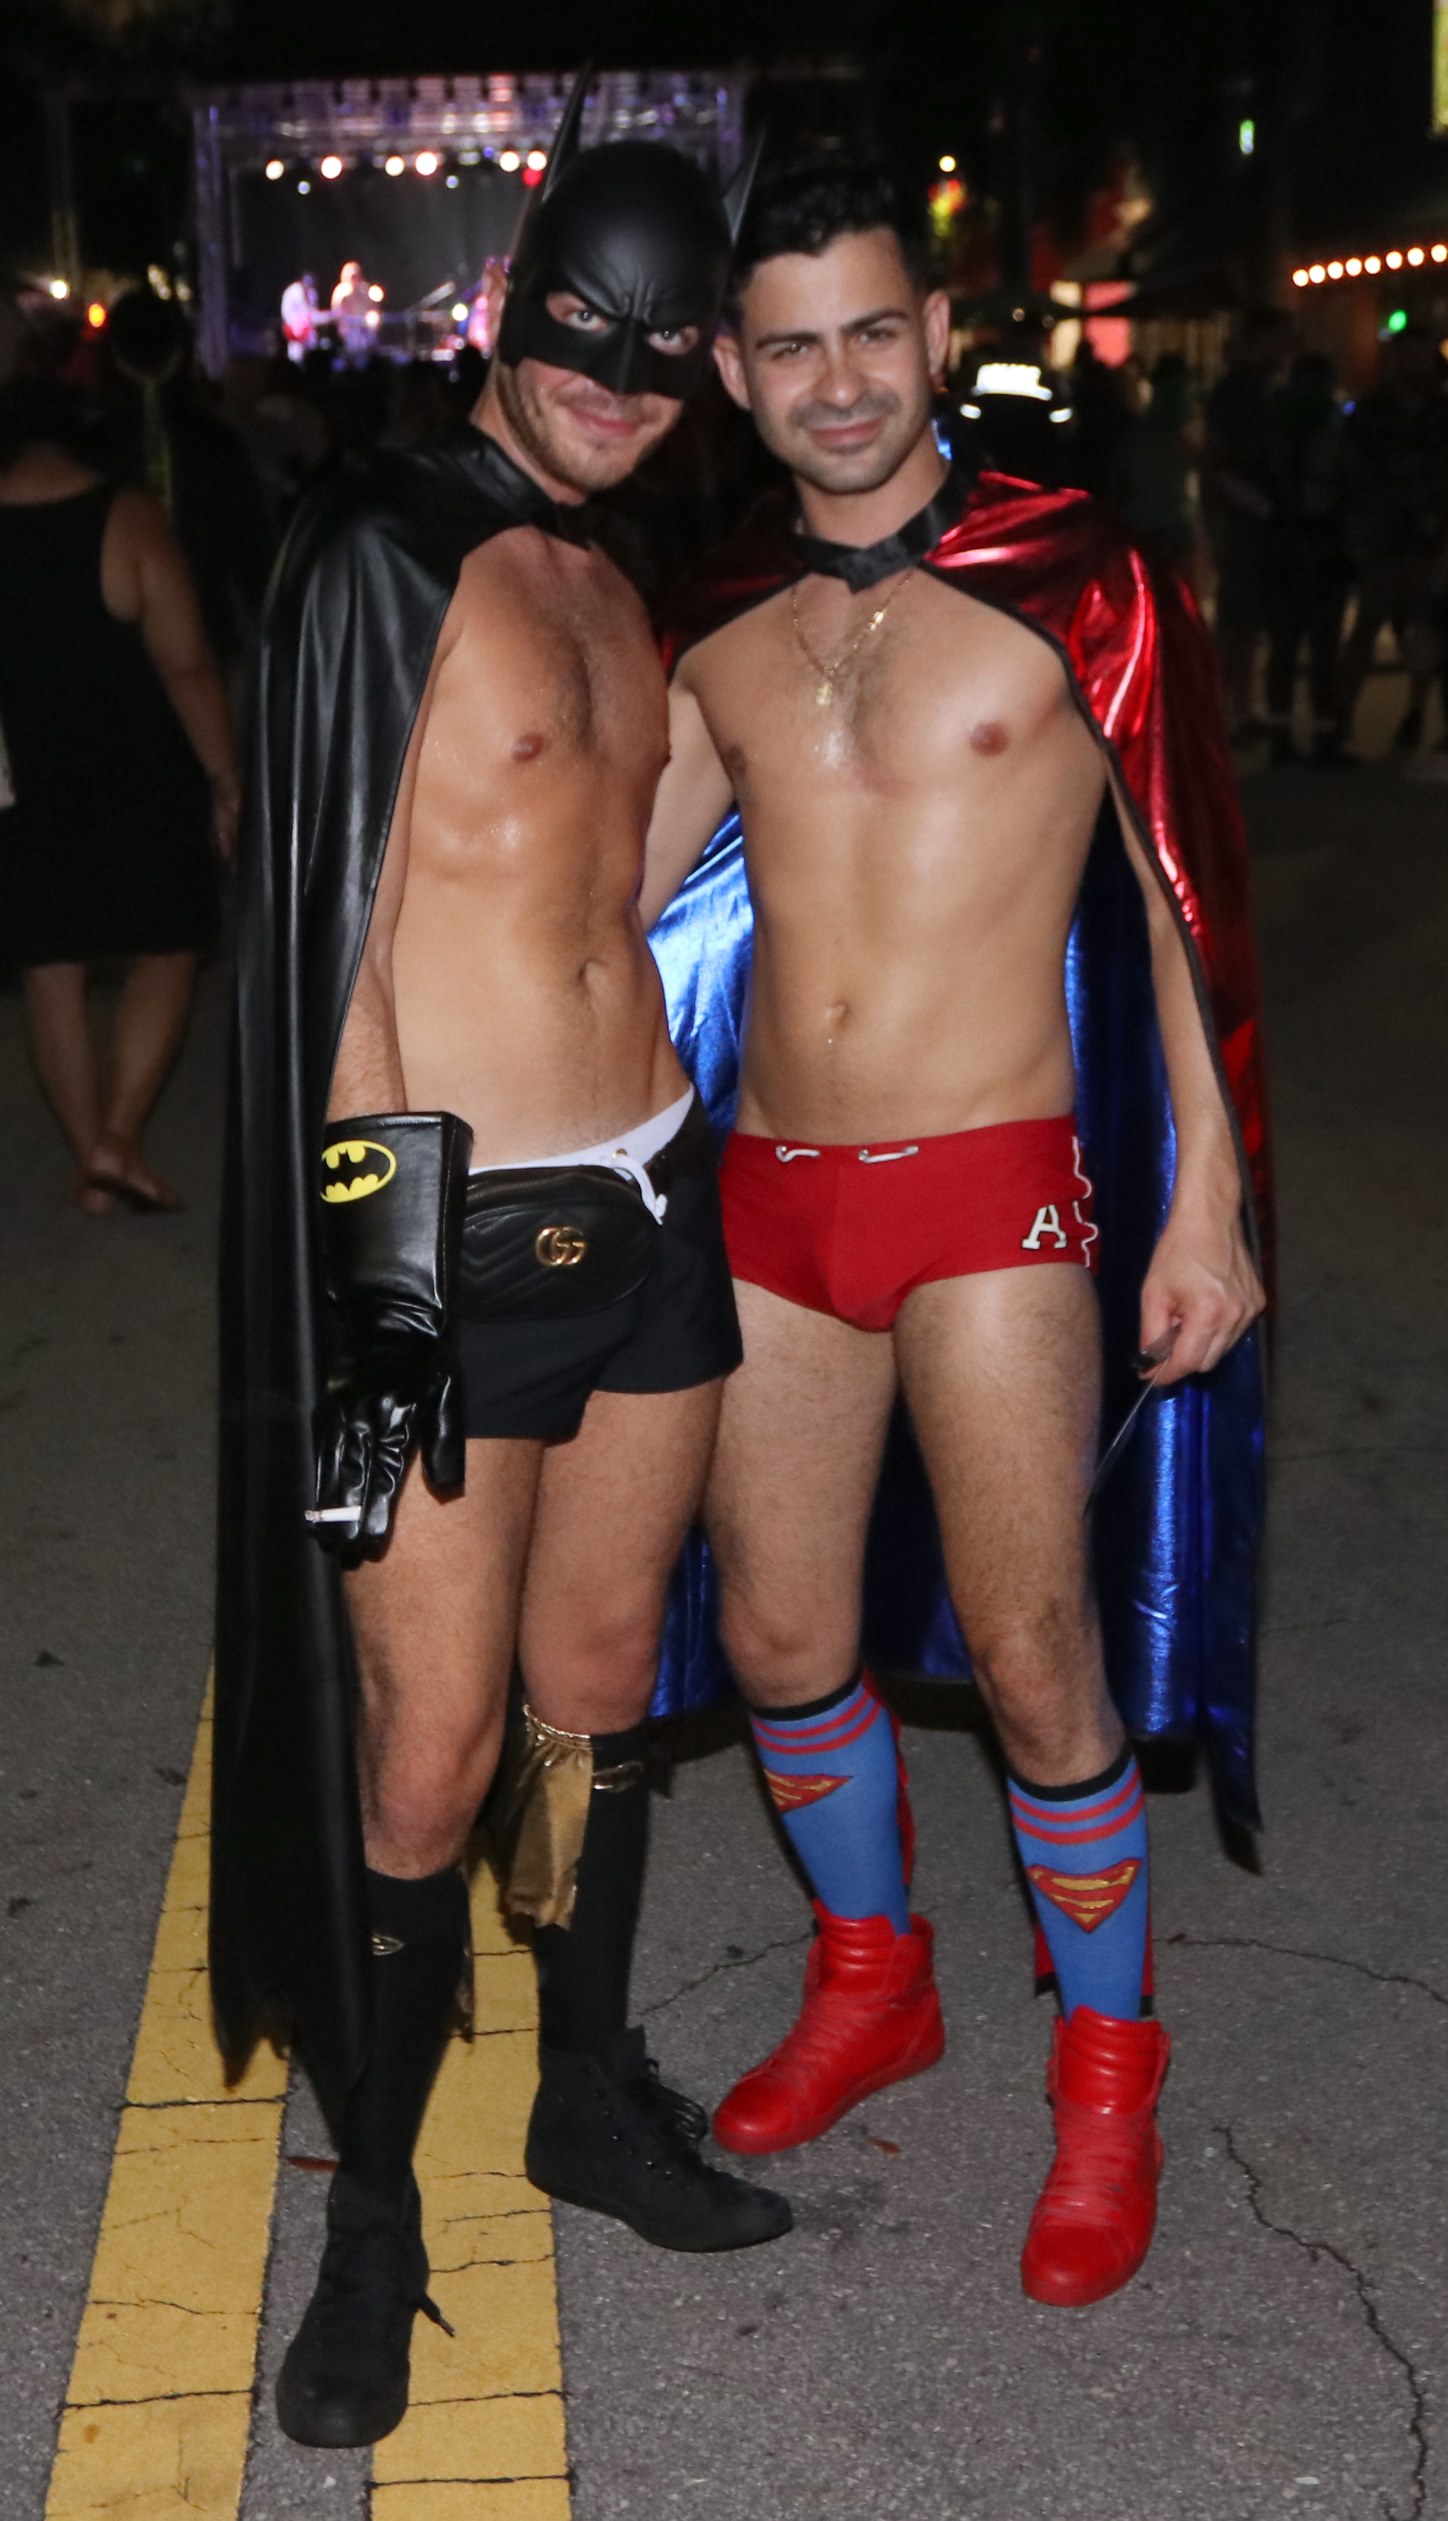 Sexy Batman & Superman at Moonfest 2019 (photo by: Mike Jalches)